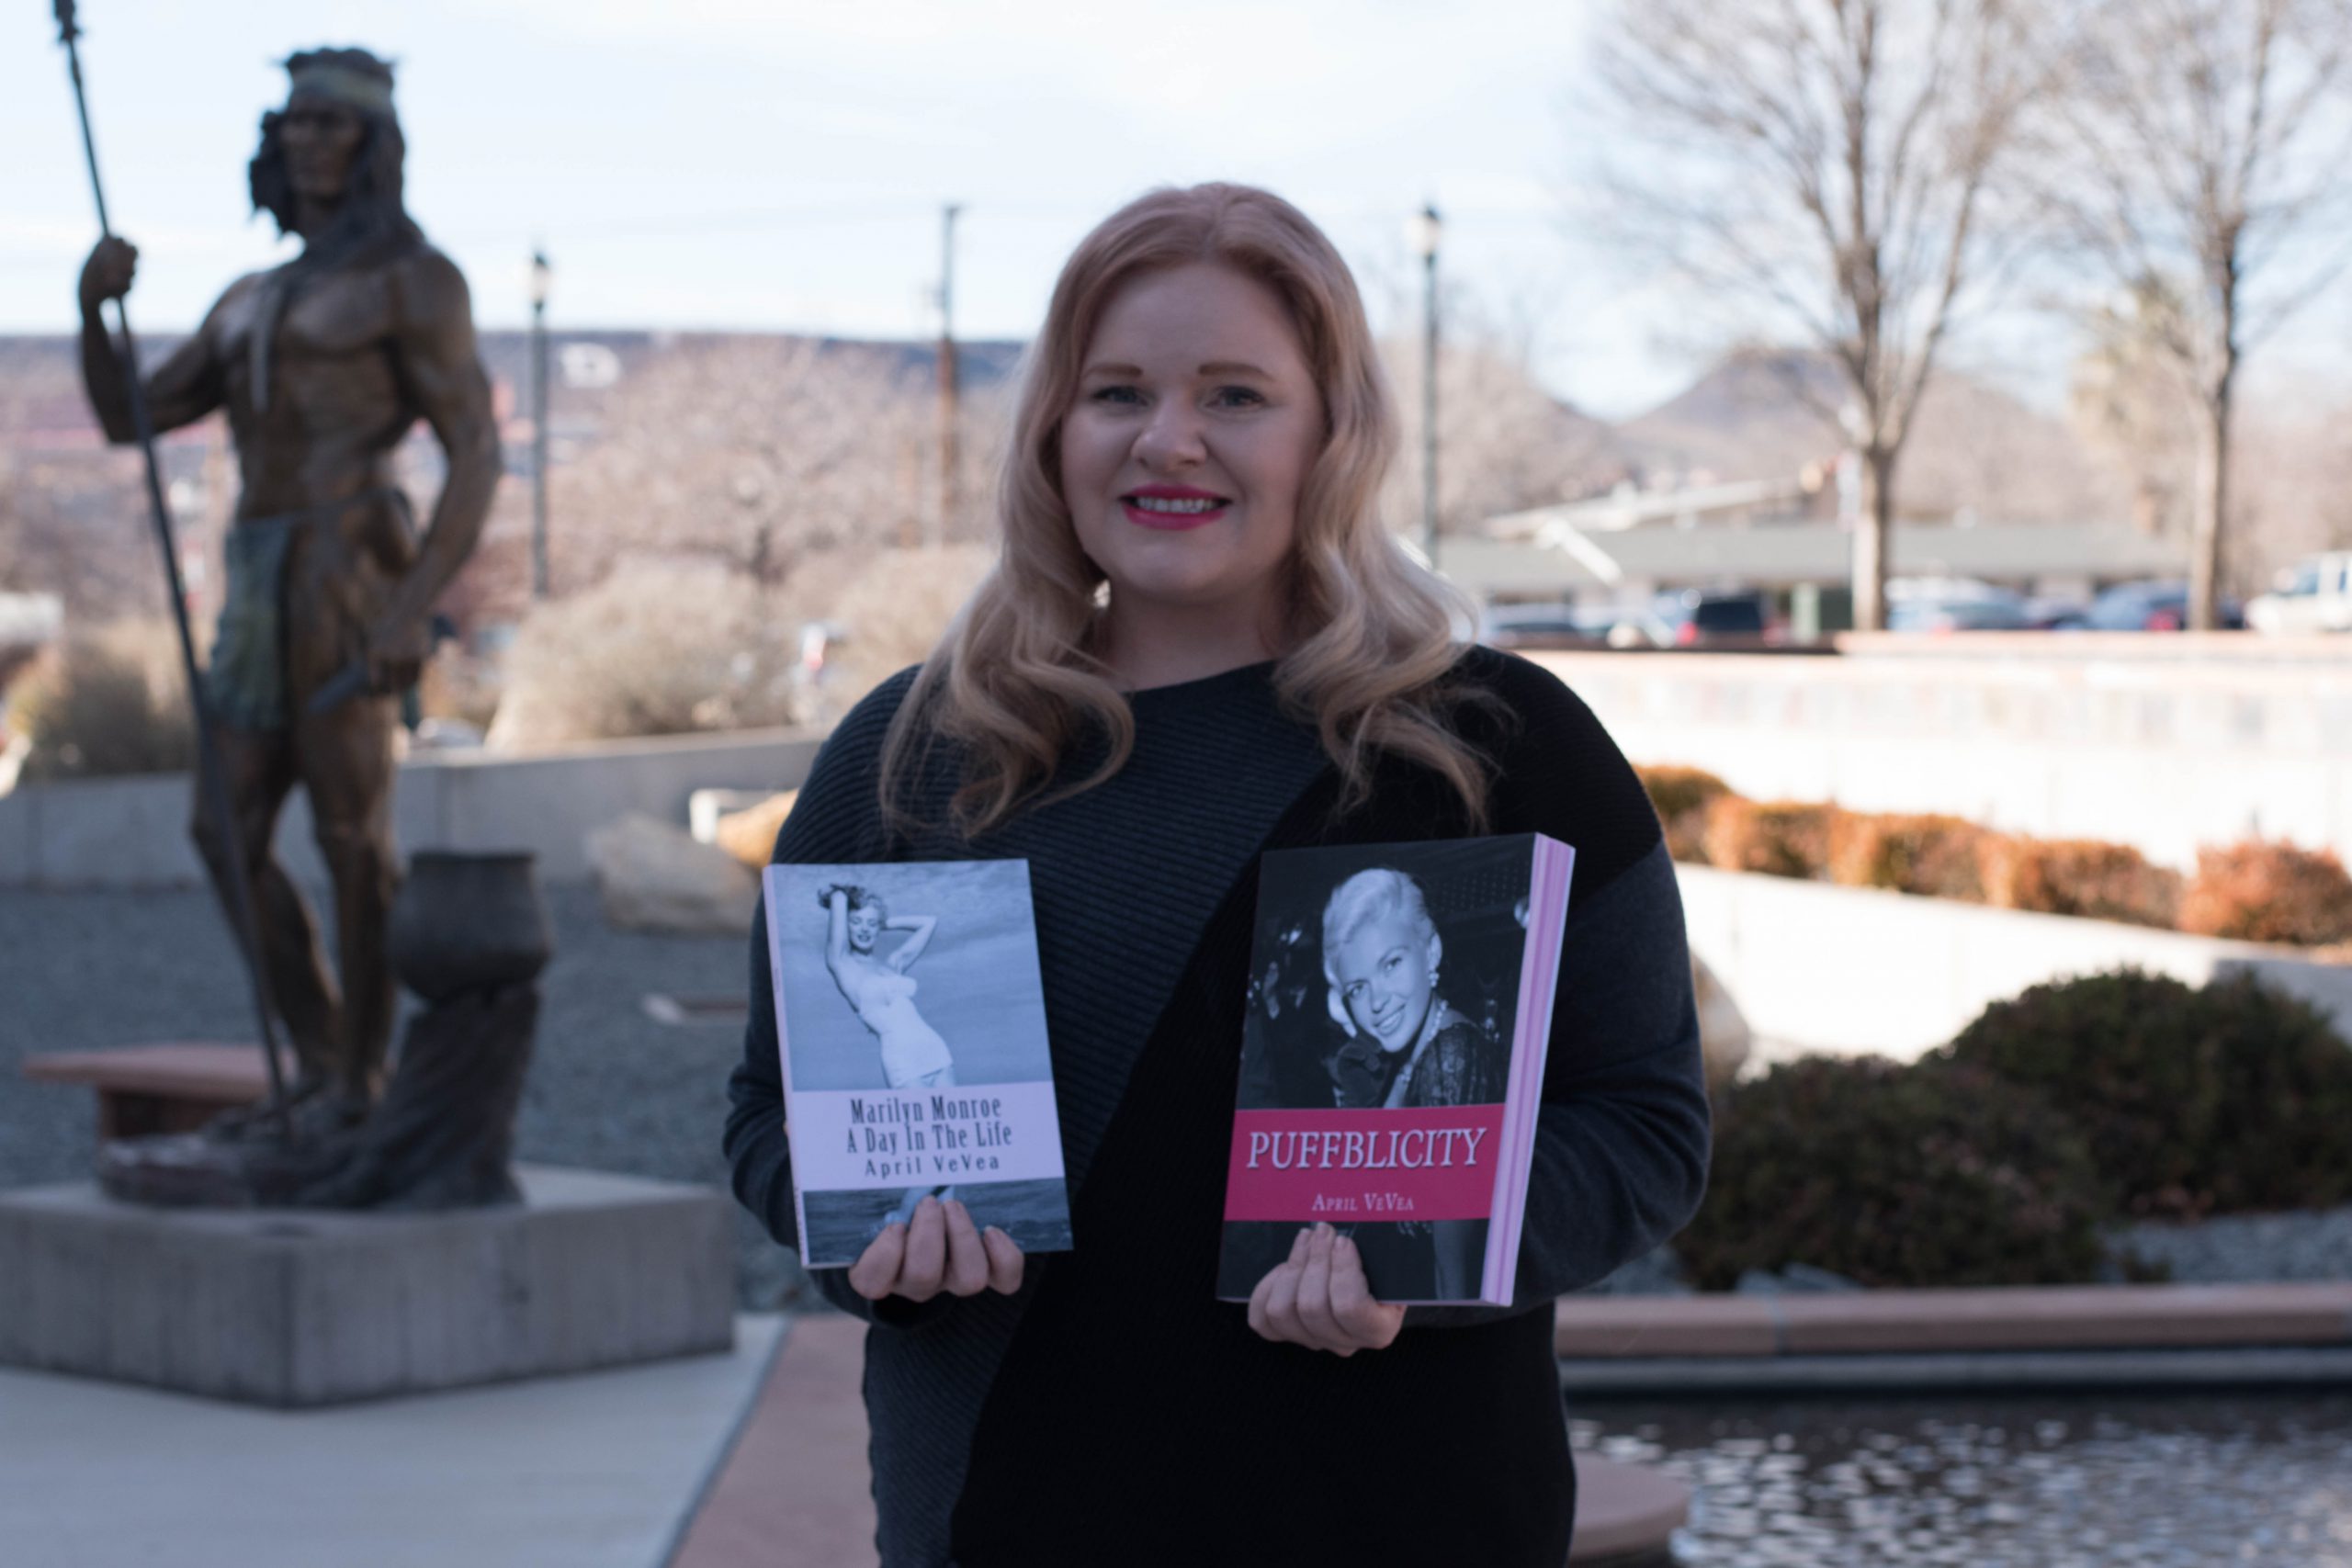 Student brings Hollywood magic to campus, publishes books about ‘Golden Era’